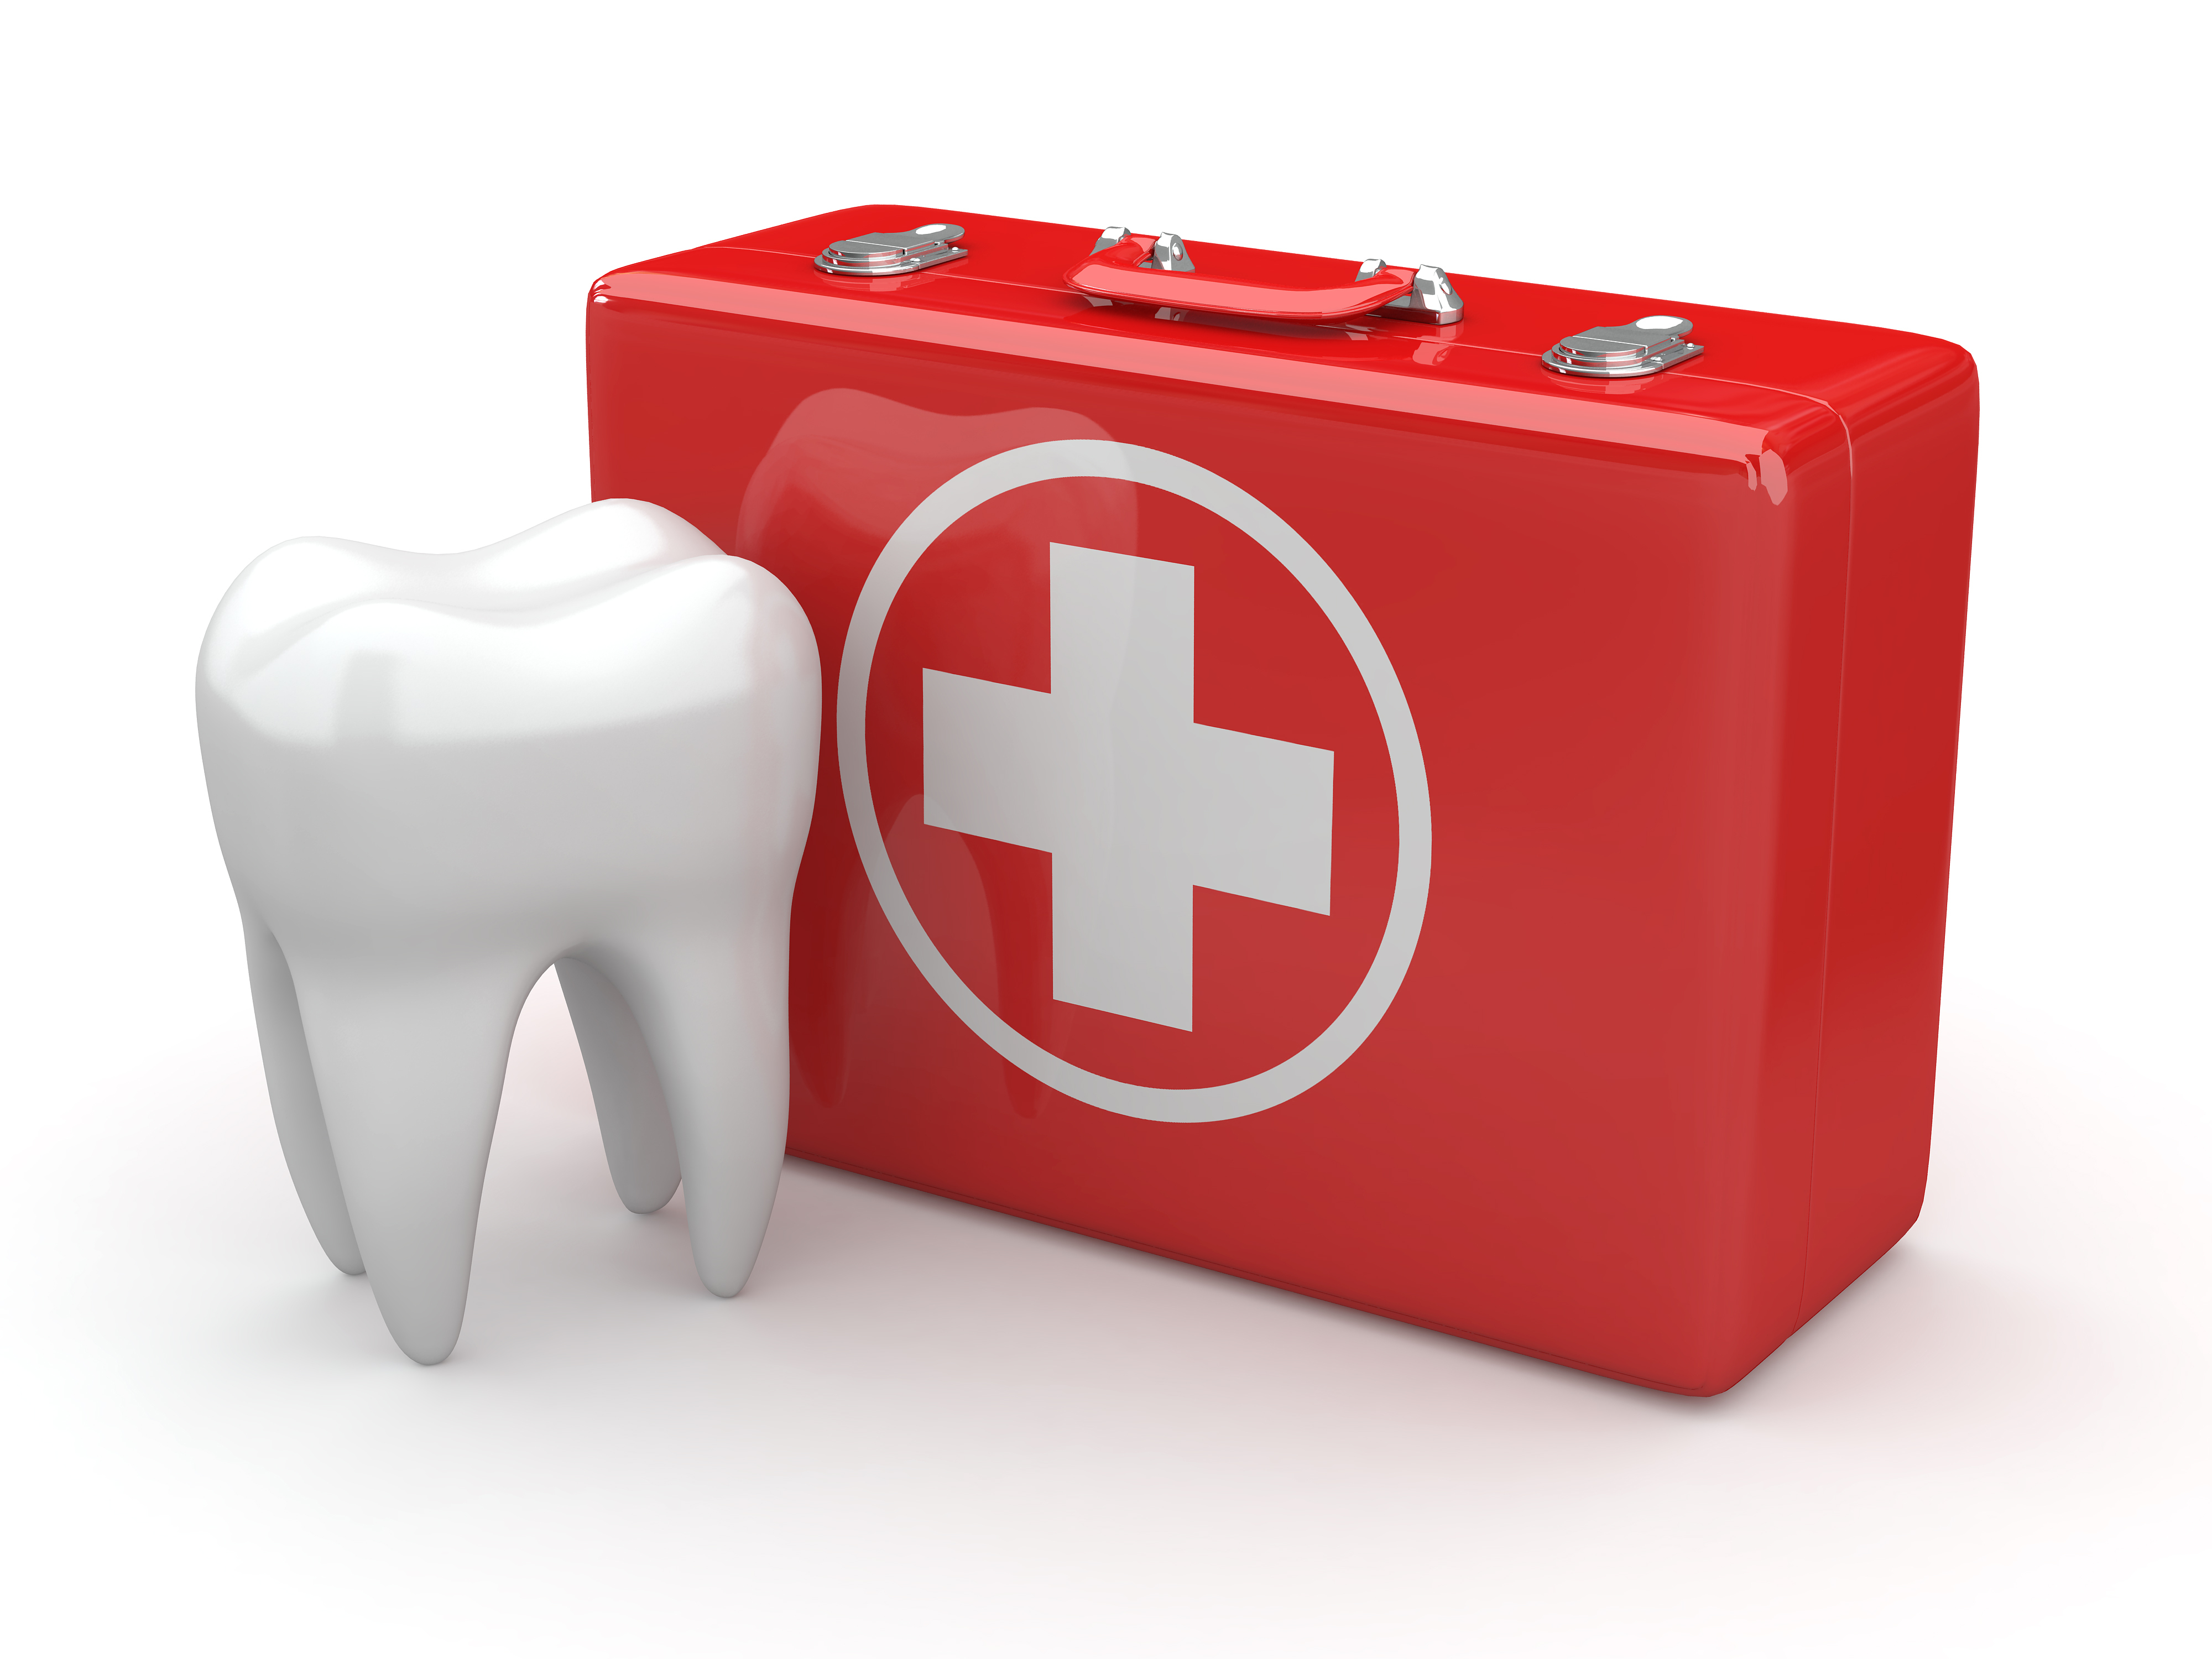 Don’t Panic: A better Understanding of Emergency Dentistry